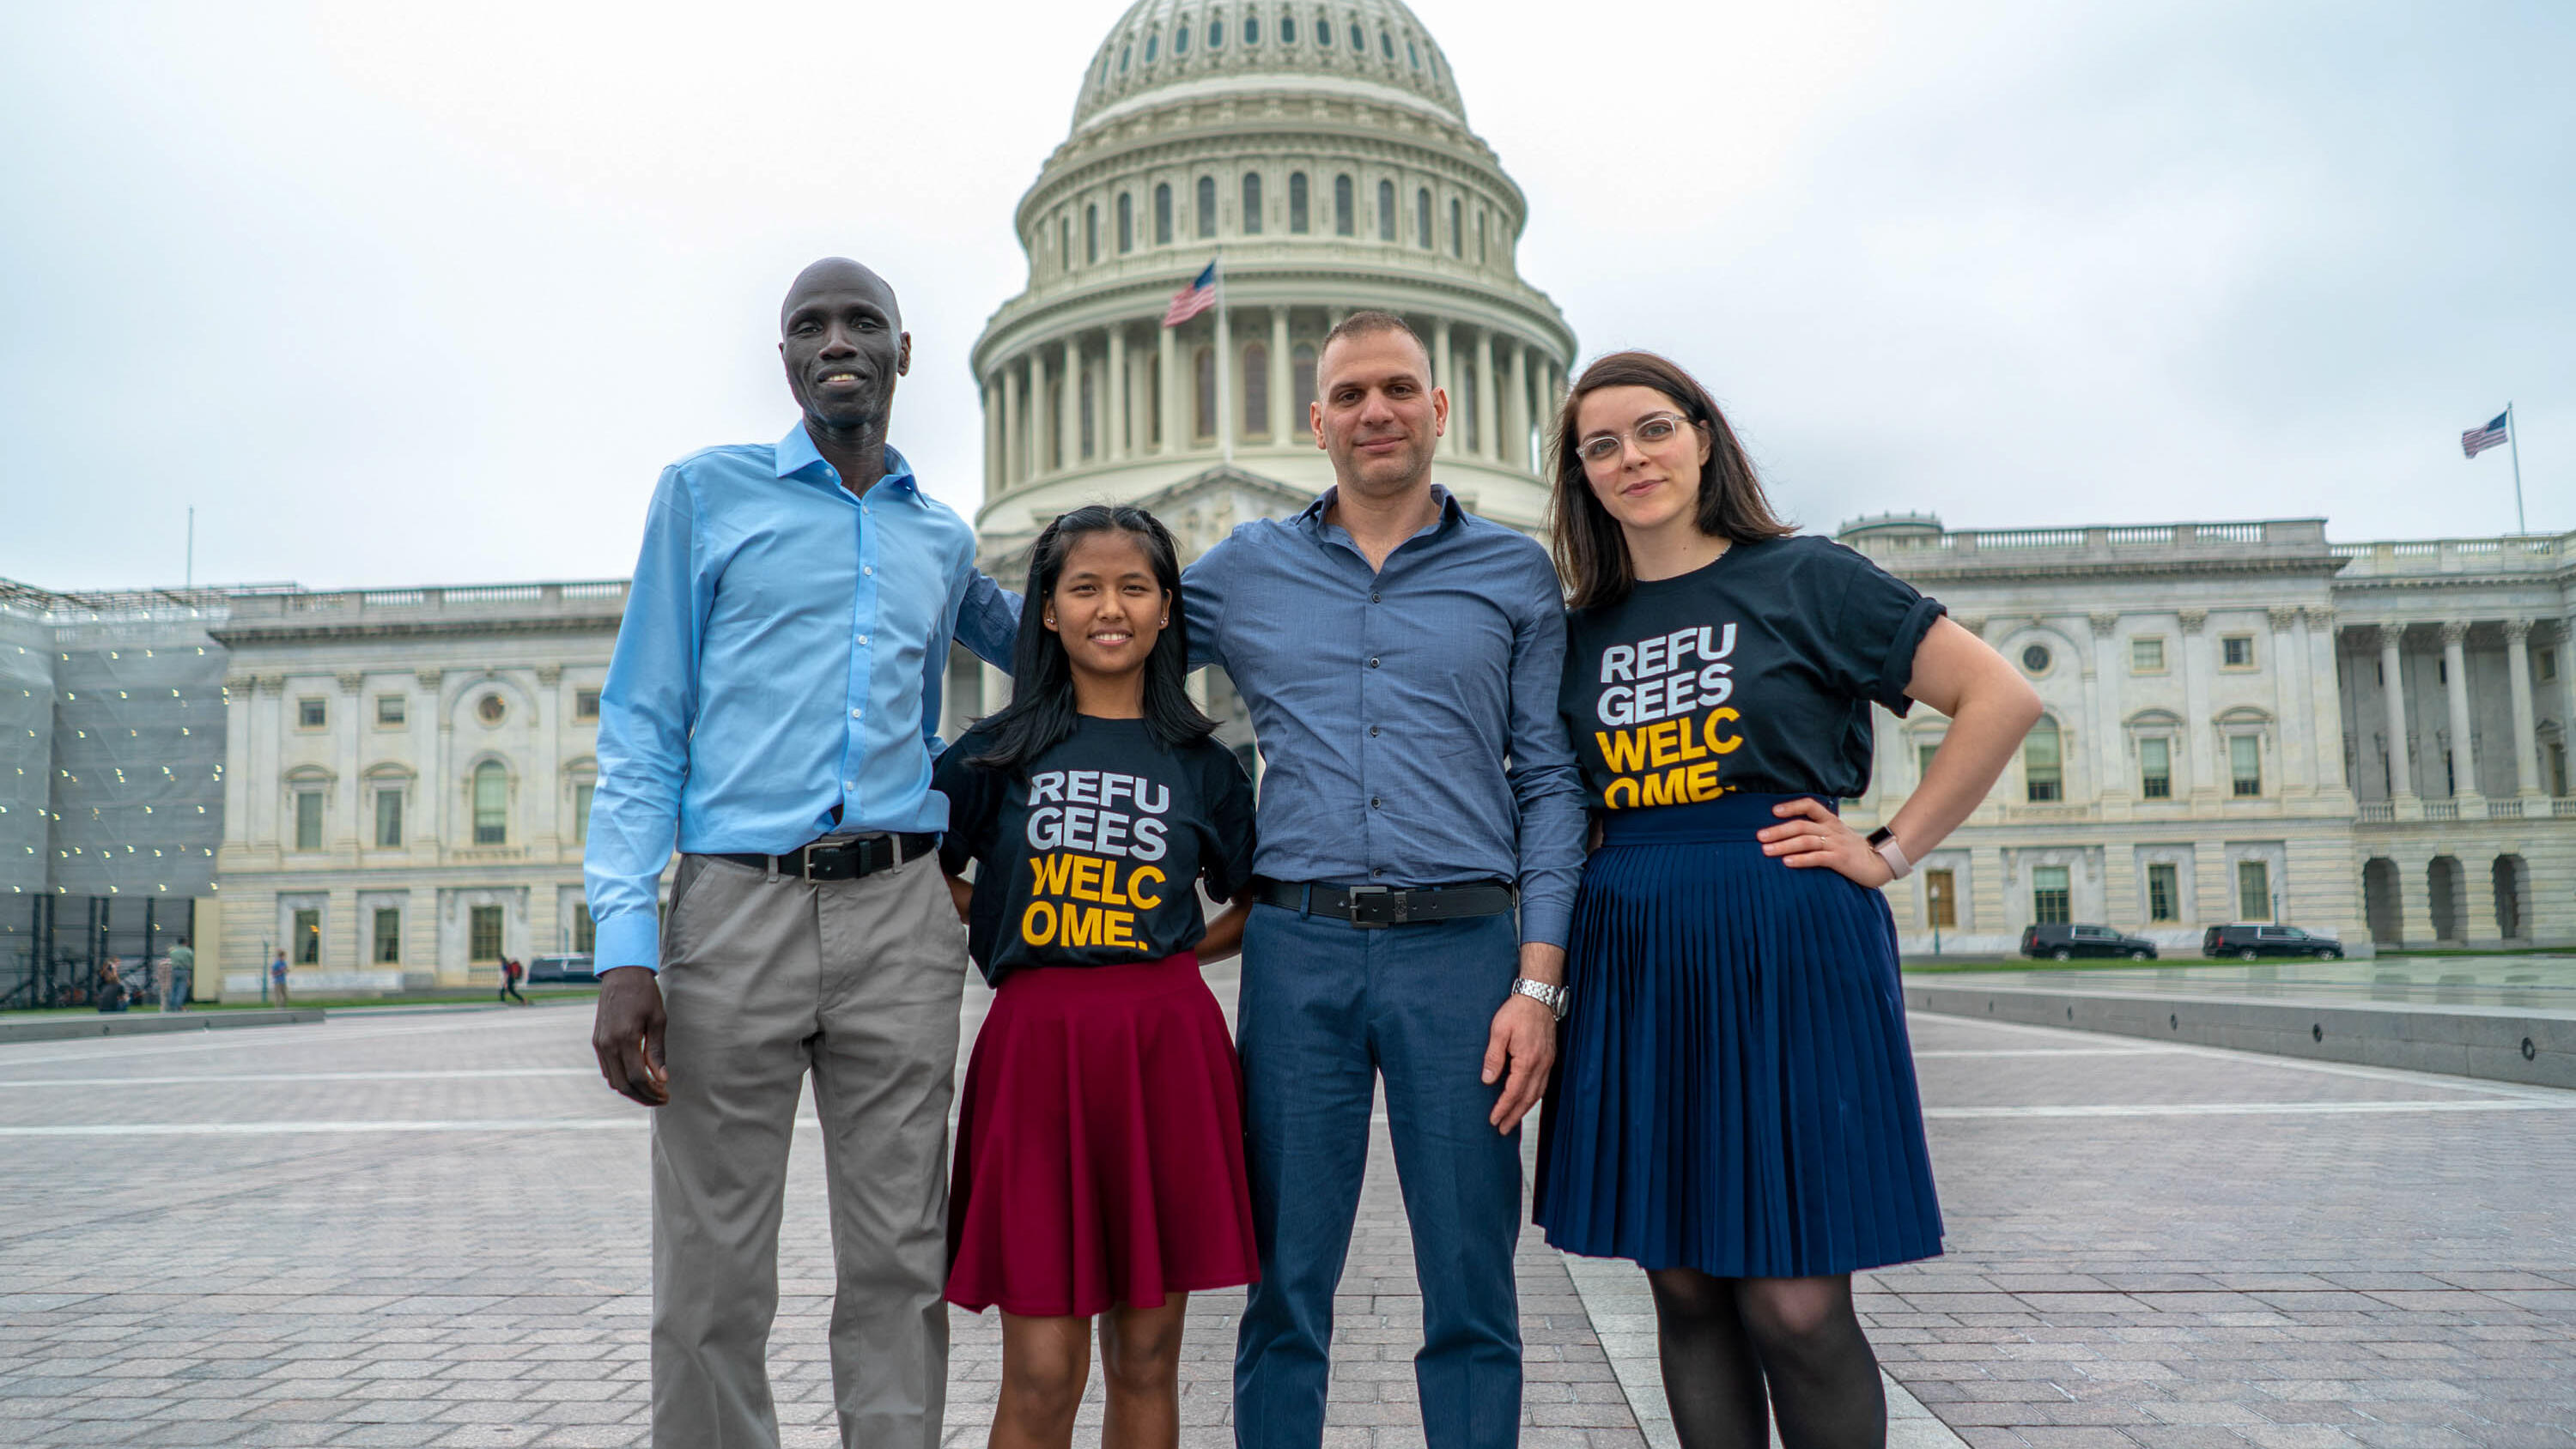 Four people pose for a picture in front of a capital building; two wear shorts with text reading "refugees welcome".